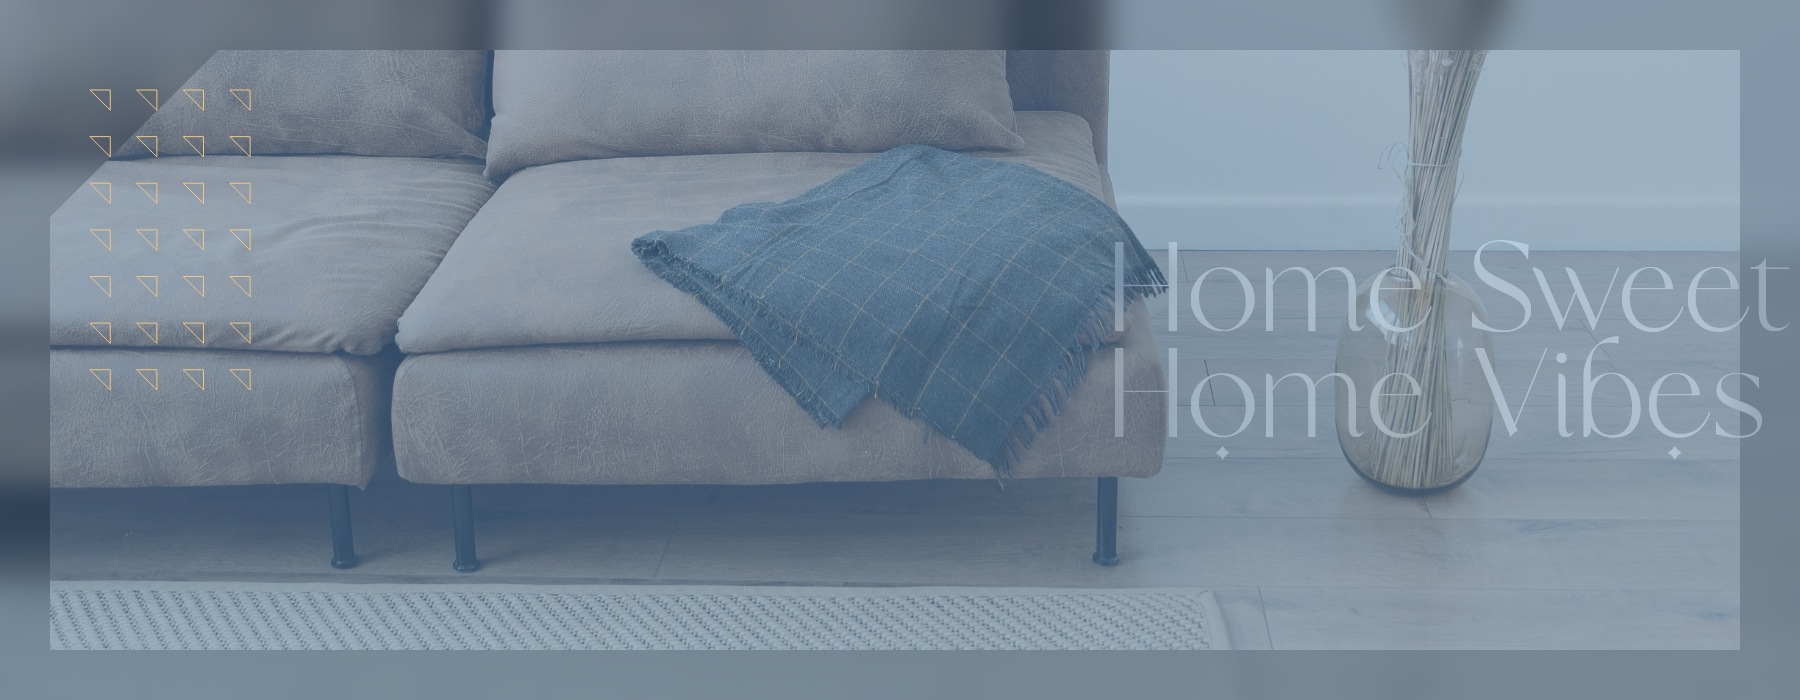 lifestyle image of a couch with colorful blankets and a text overlay